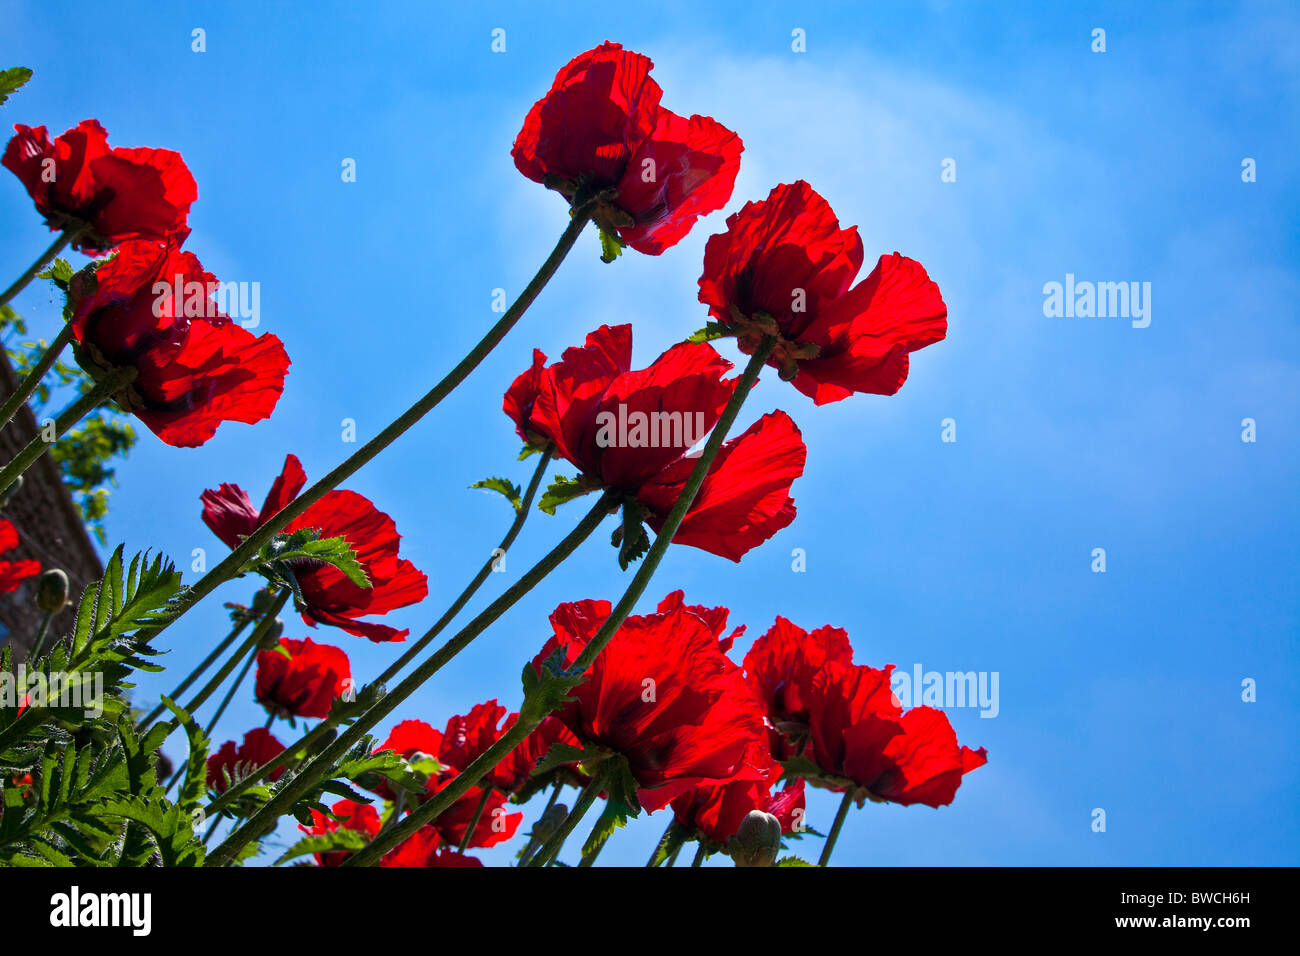 Red poppies, Papaver, in a garden against a clear blue sky Stock Photo